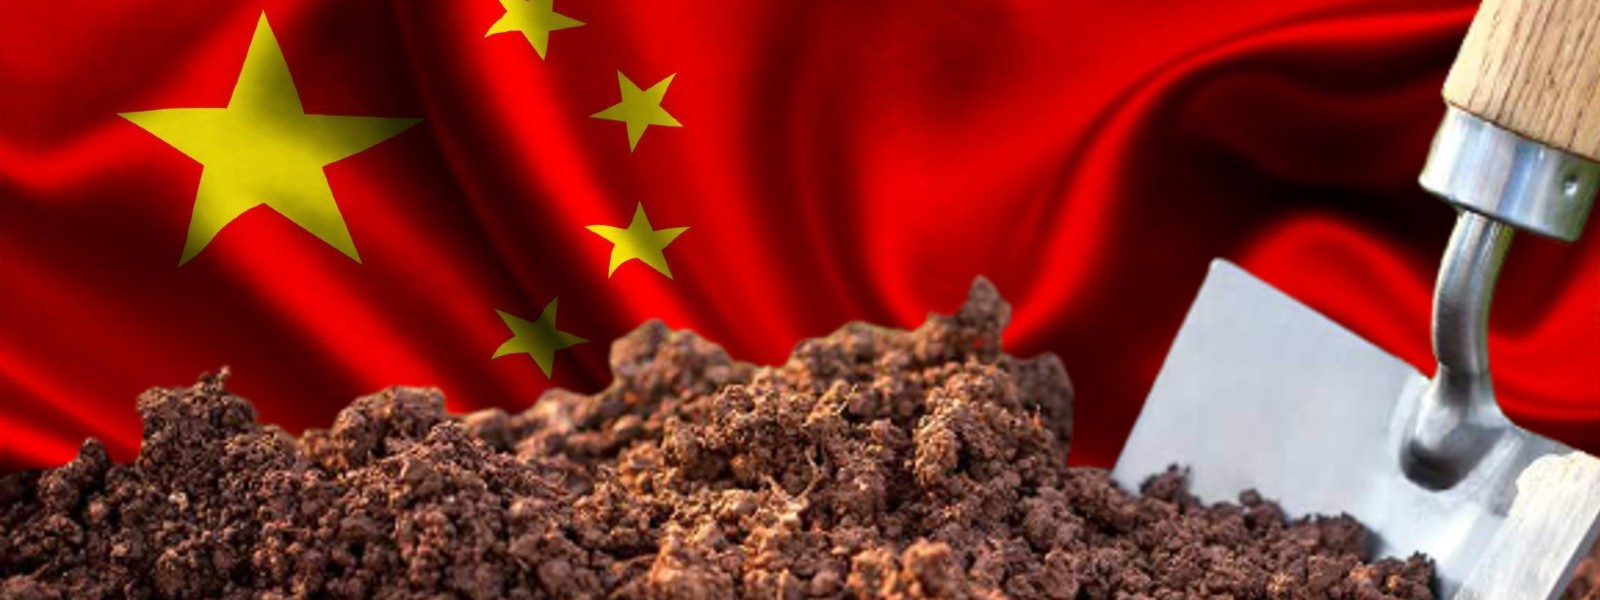 Chinese supplier wants Swiss Lab to test fertilizer; says both parties must accept results